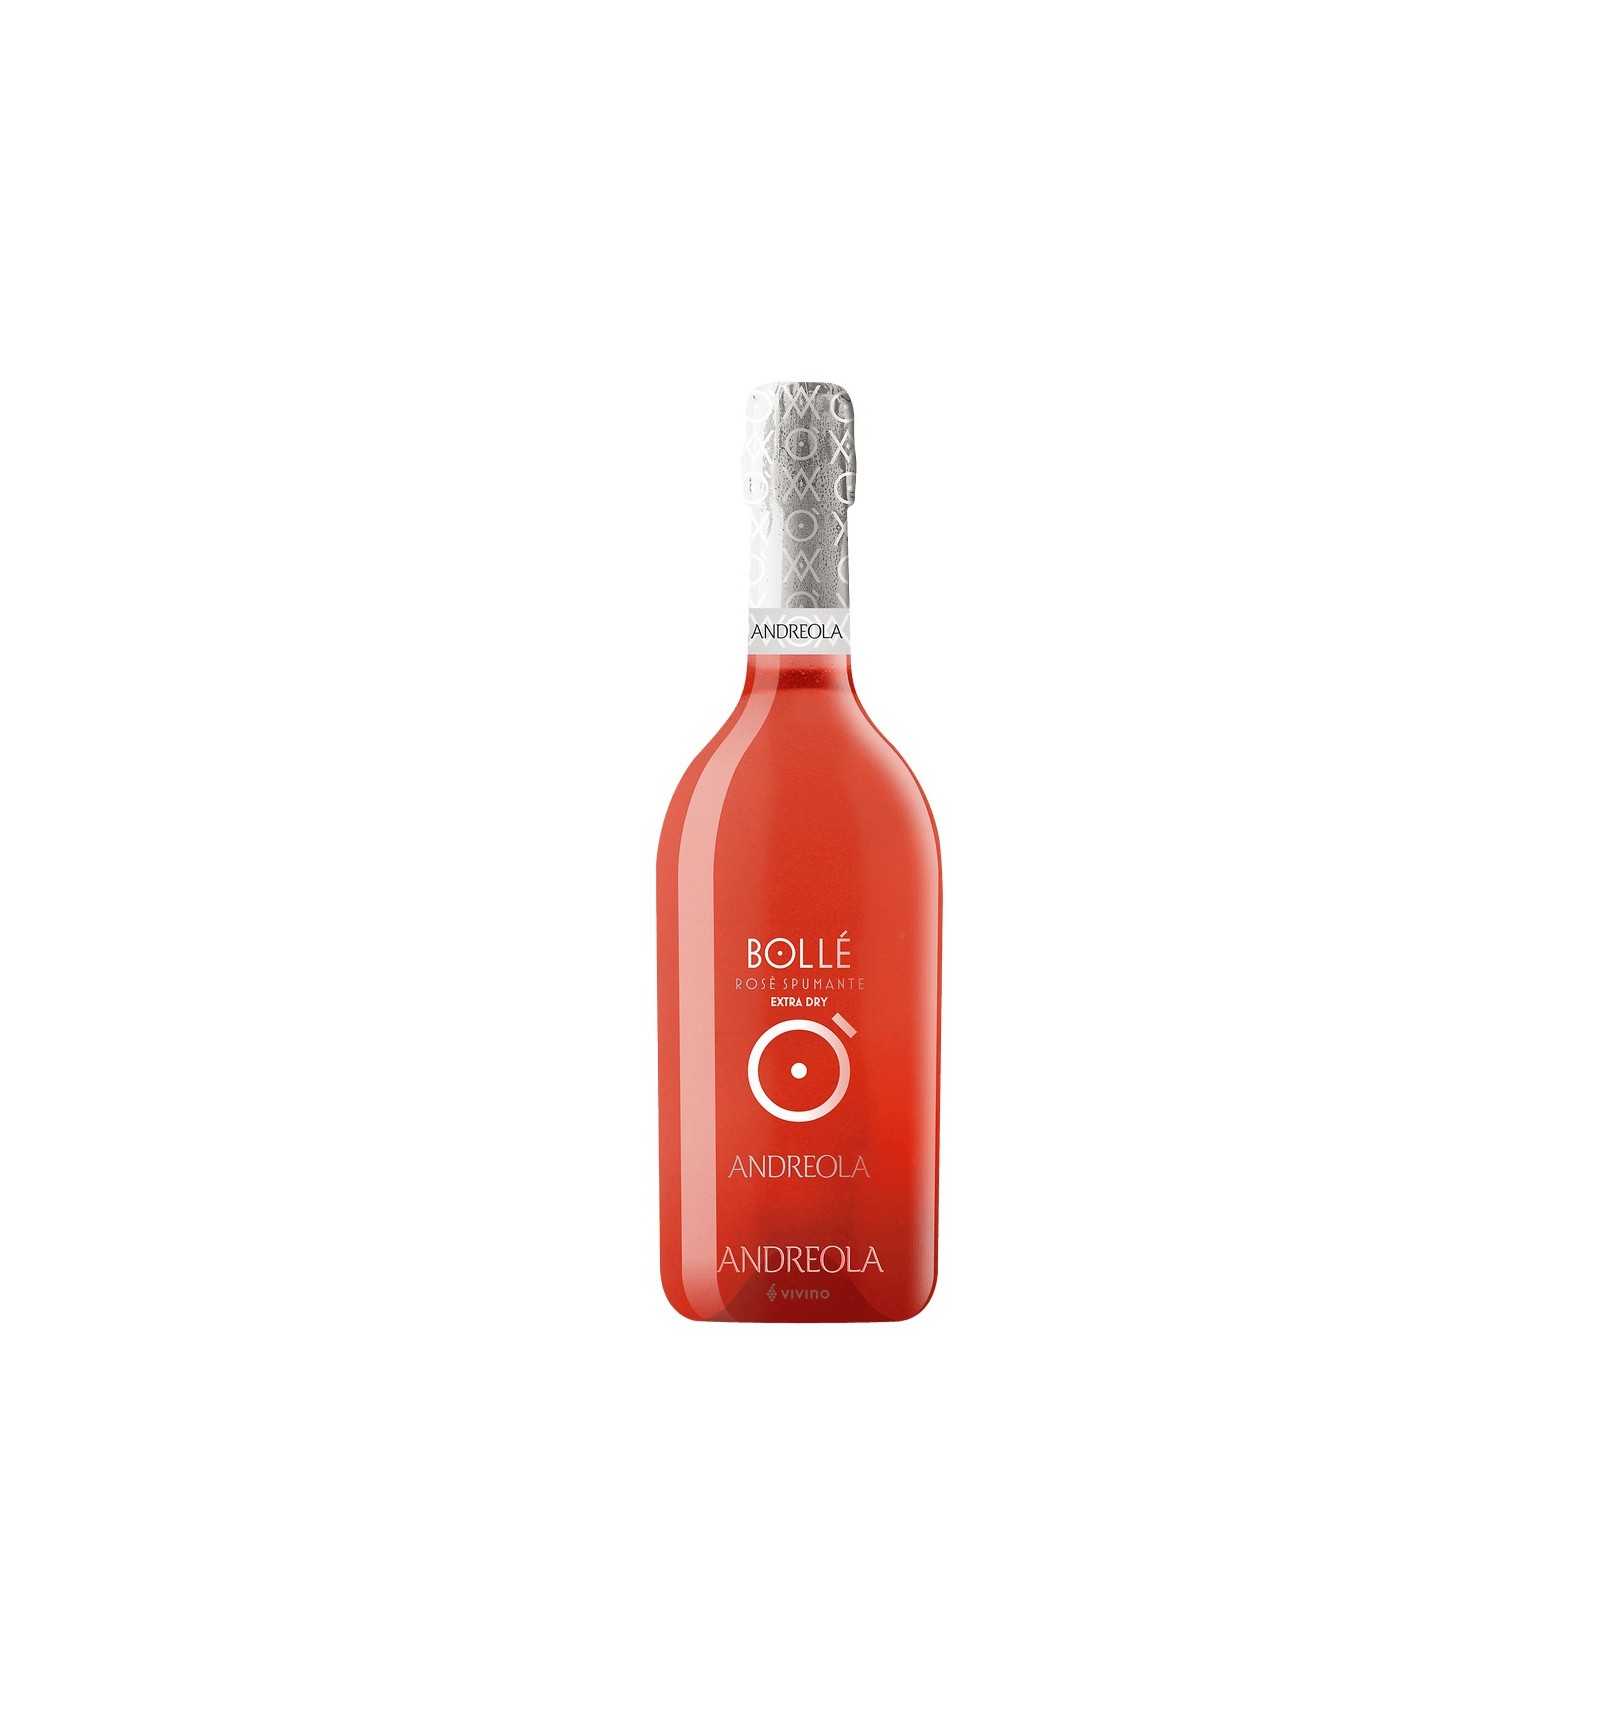 SPUMOSO BOLLE ROSE EXTRA DRY 75 CL (U)